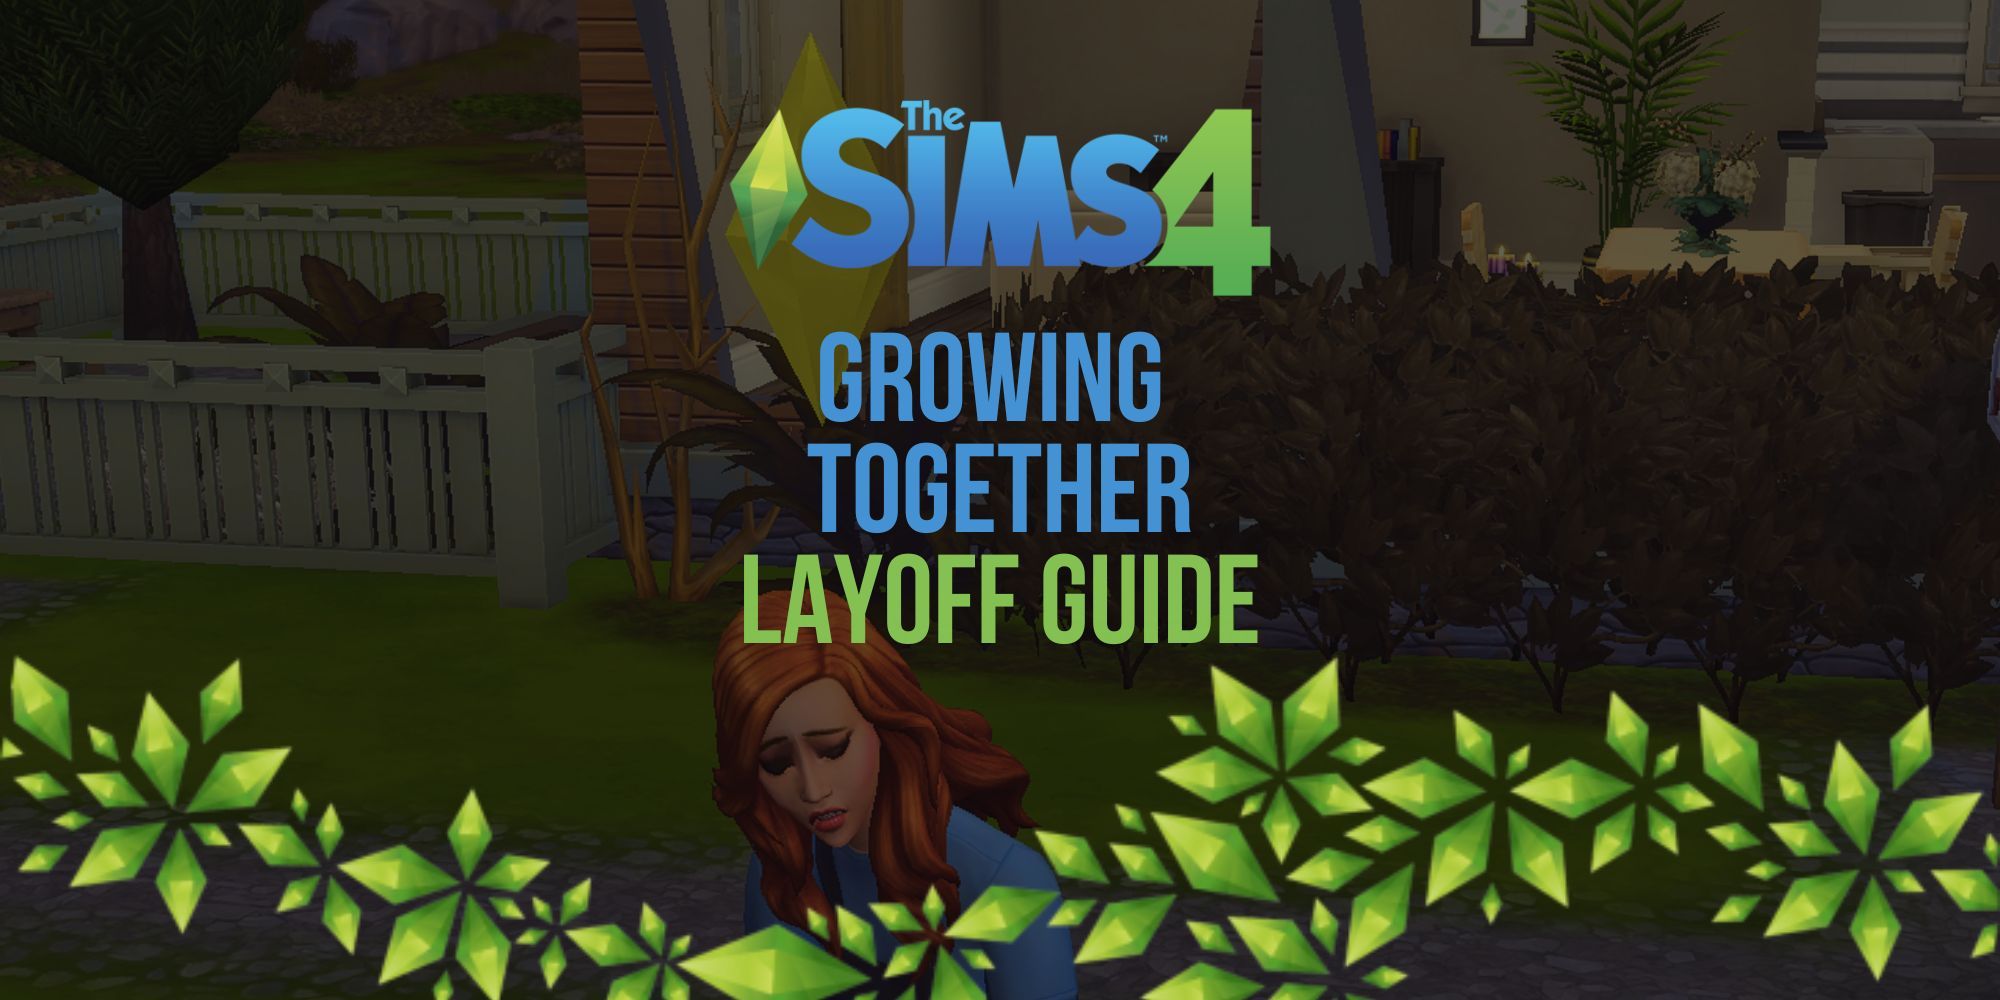 The Sims 4 Growing Together Layoff Guide